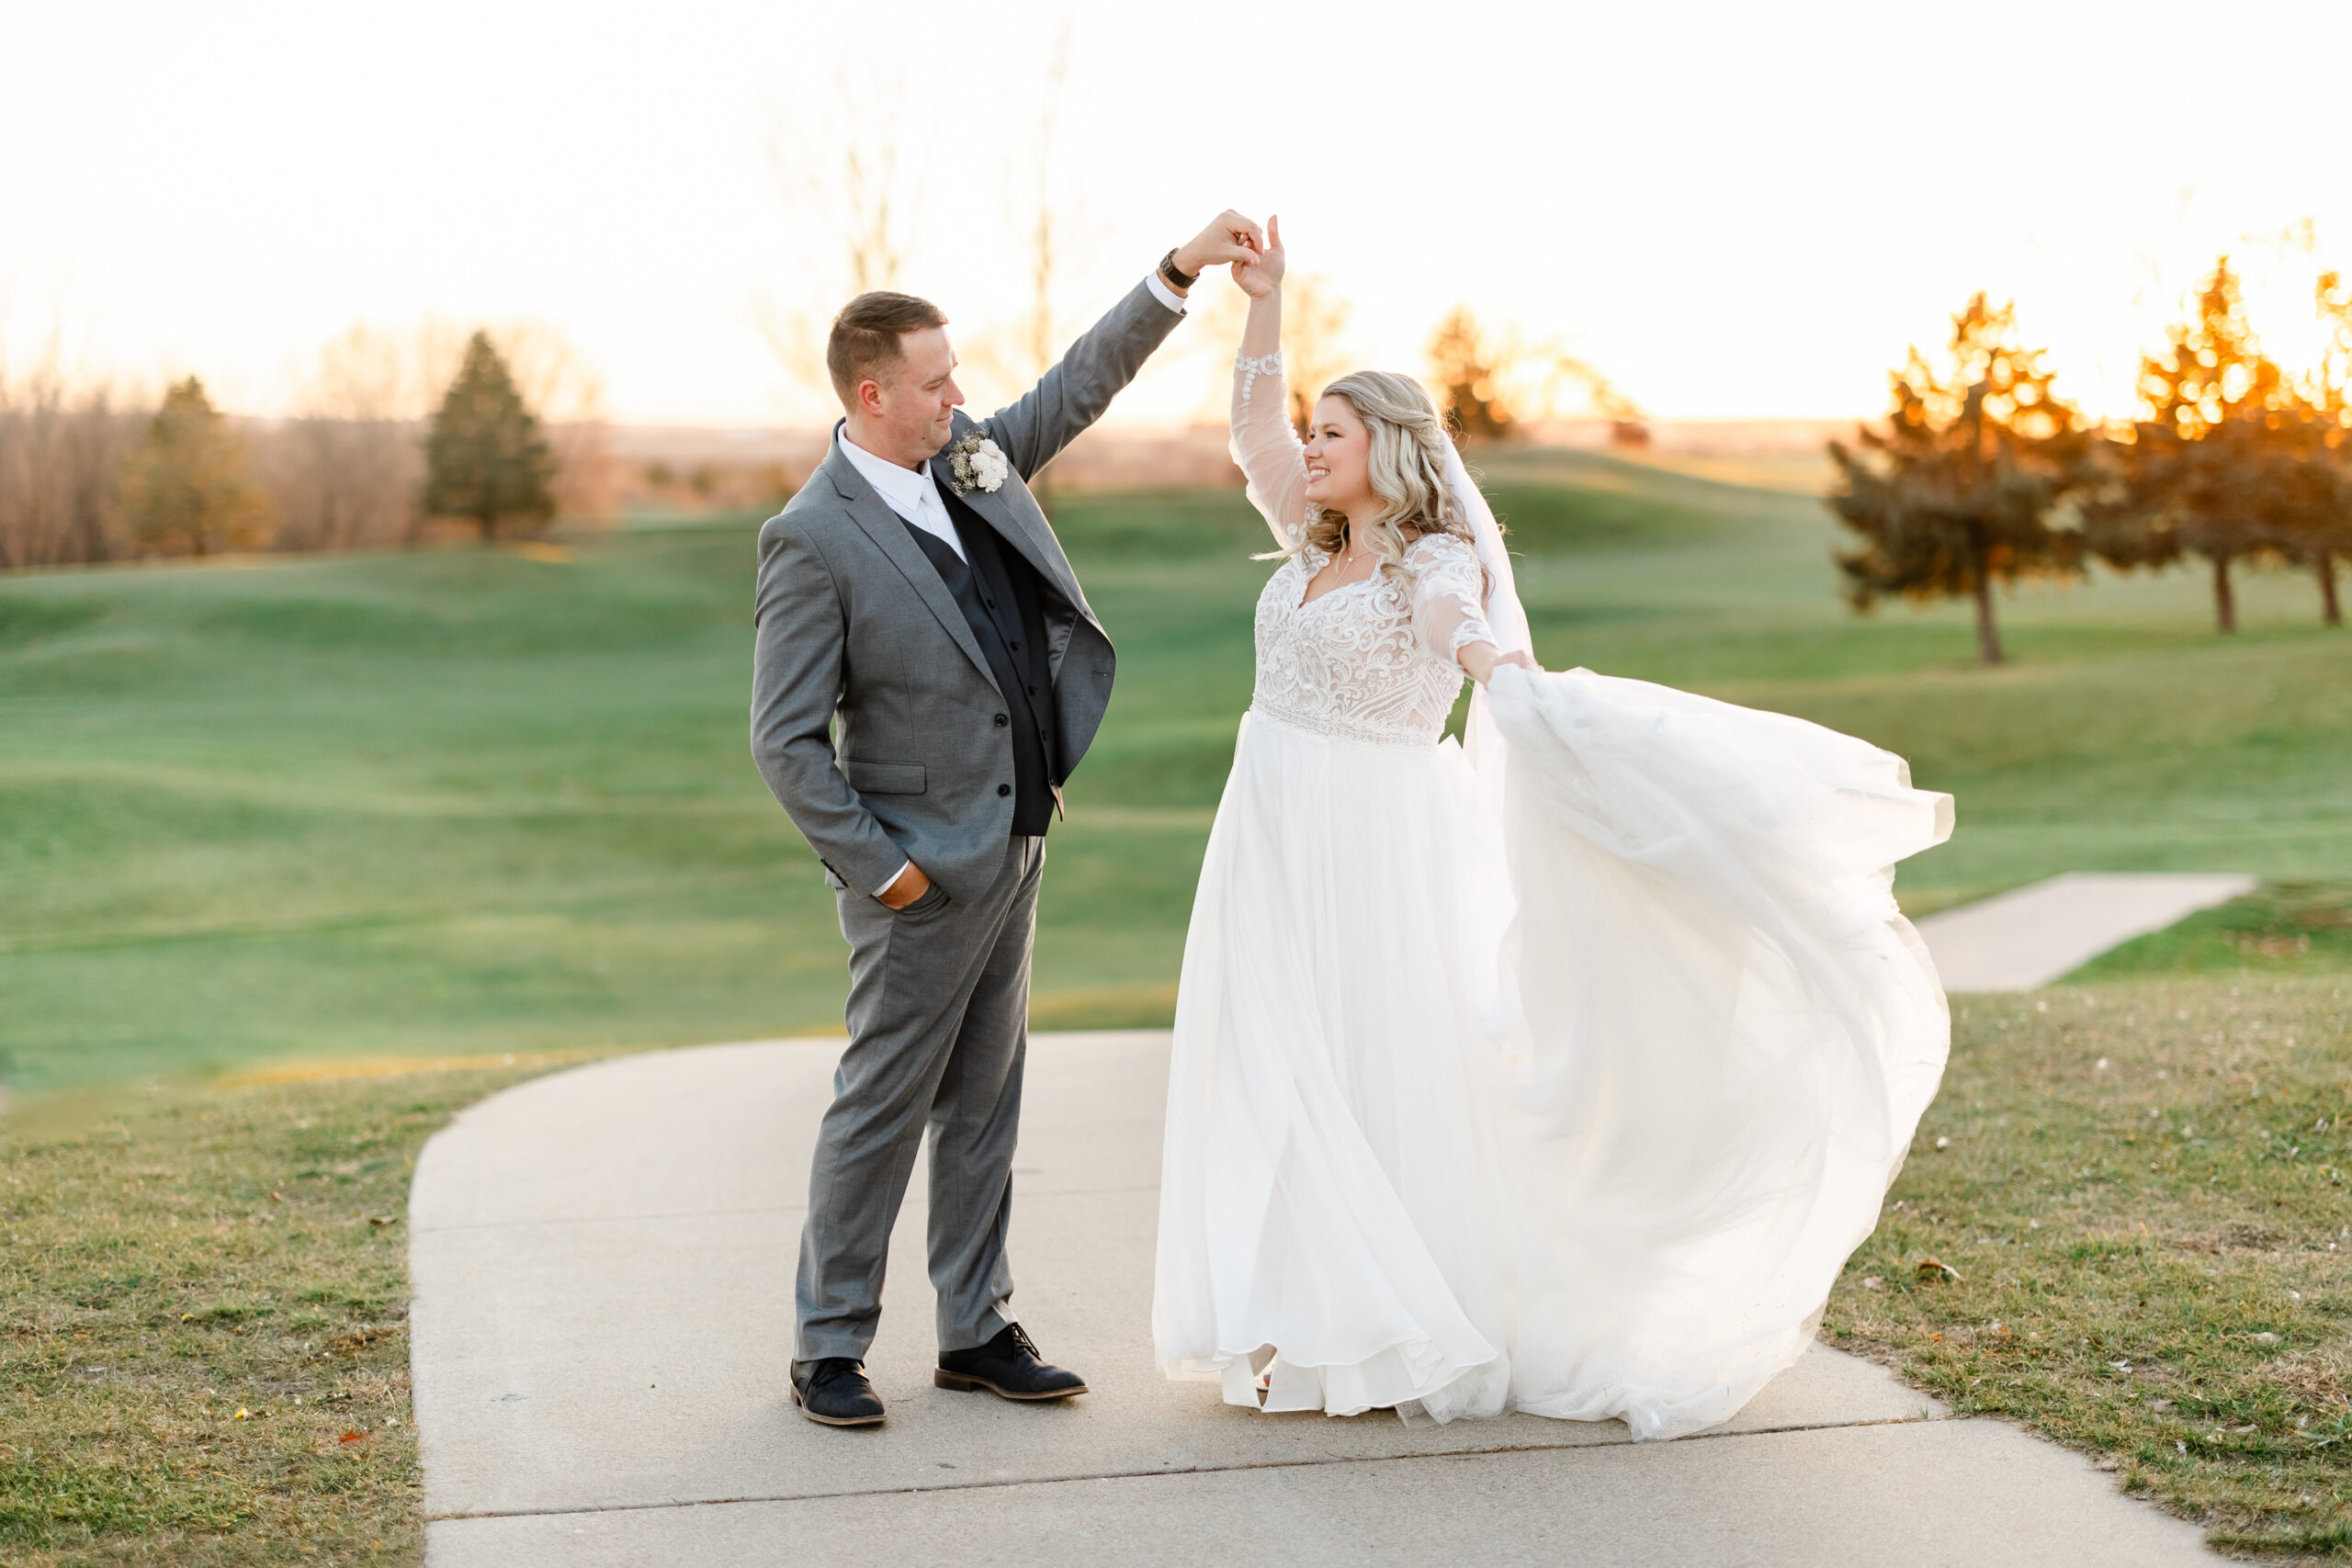 Groom spinning bride off into the sunset at woodhaven venue minnesota